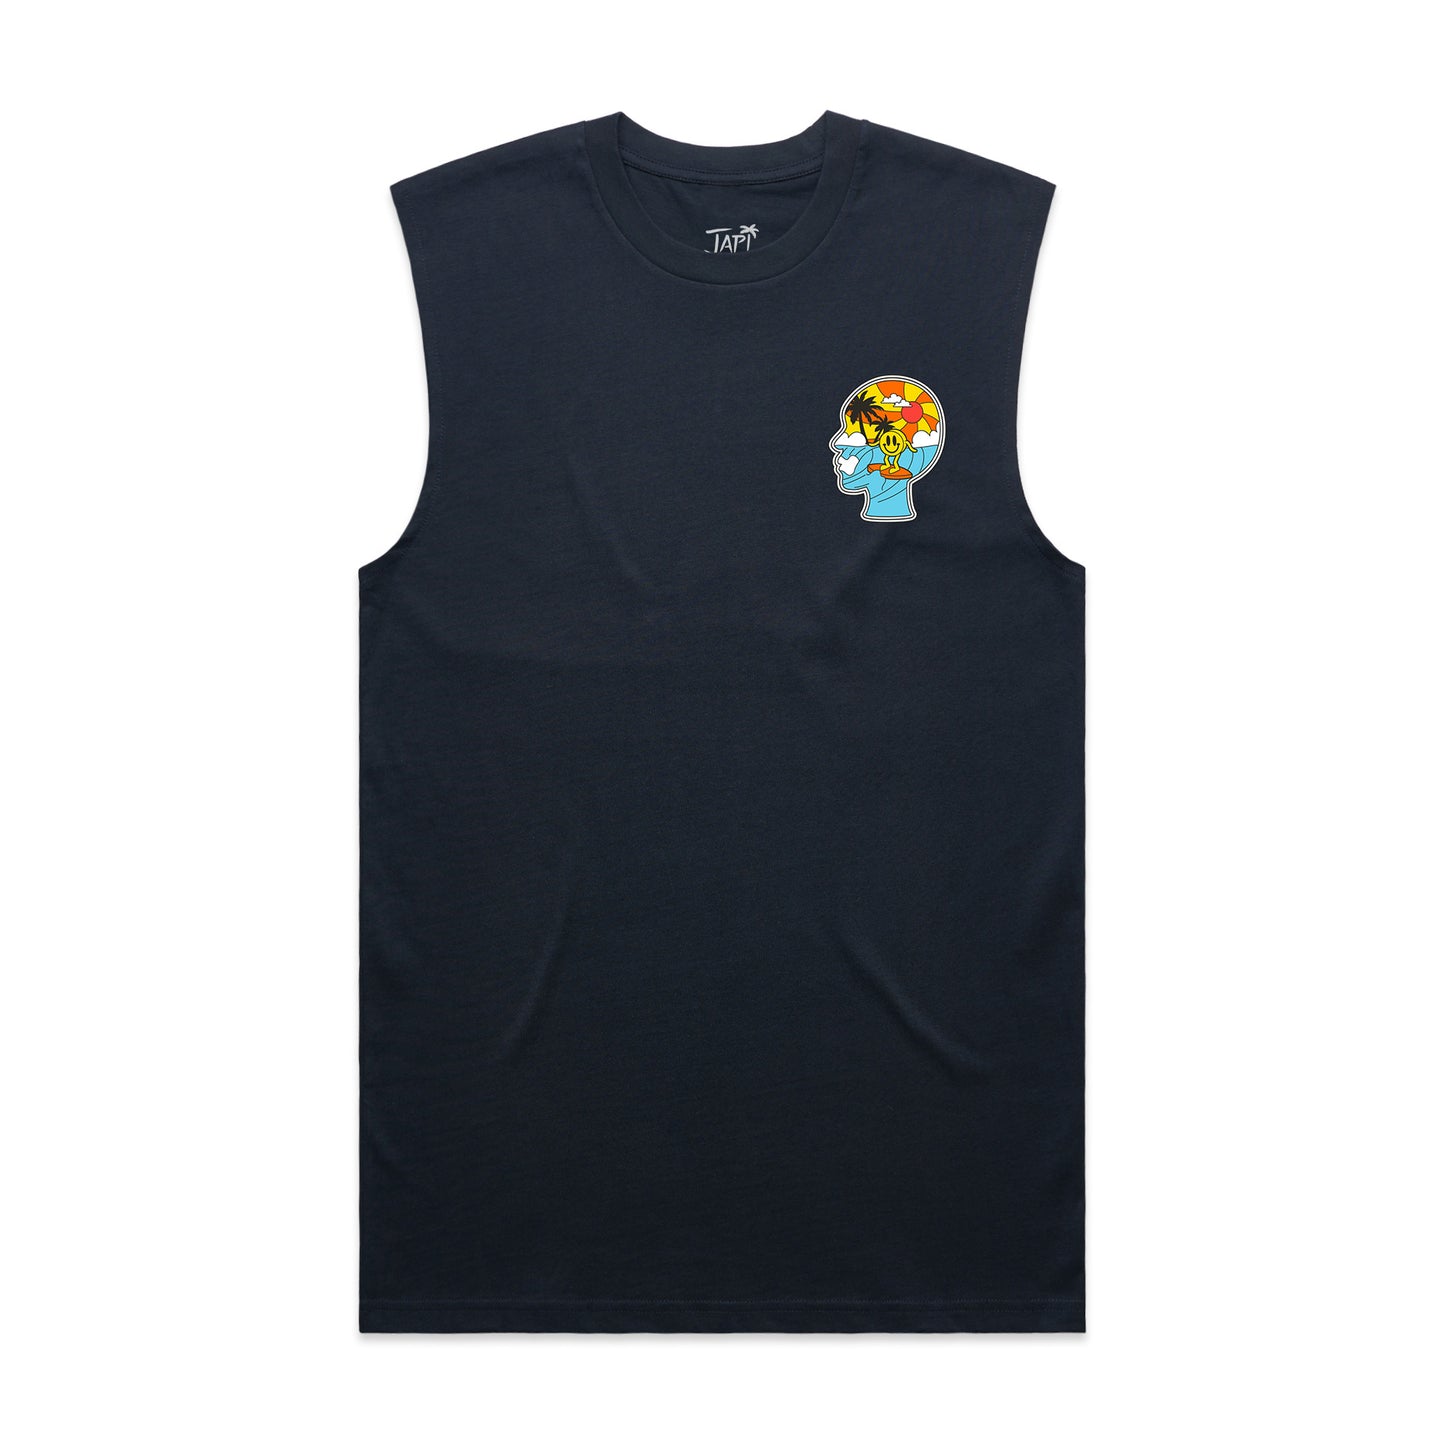 Escape To Japiness Sleeveless T-Shirt